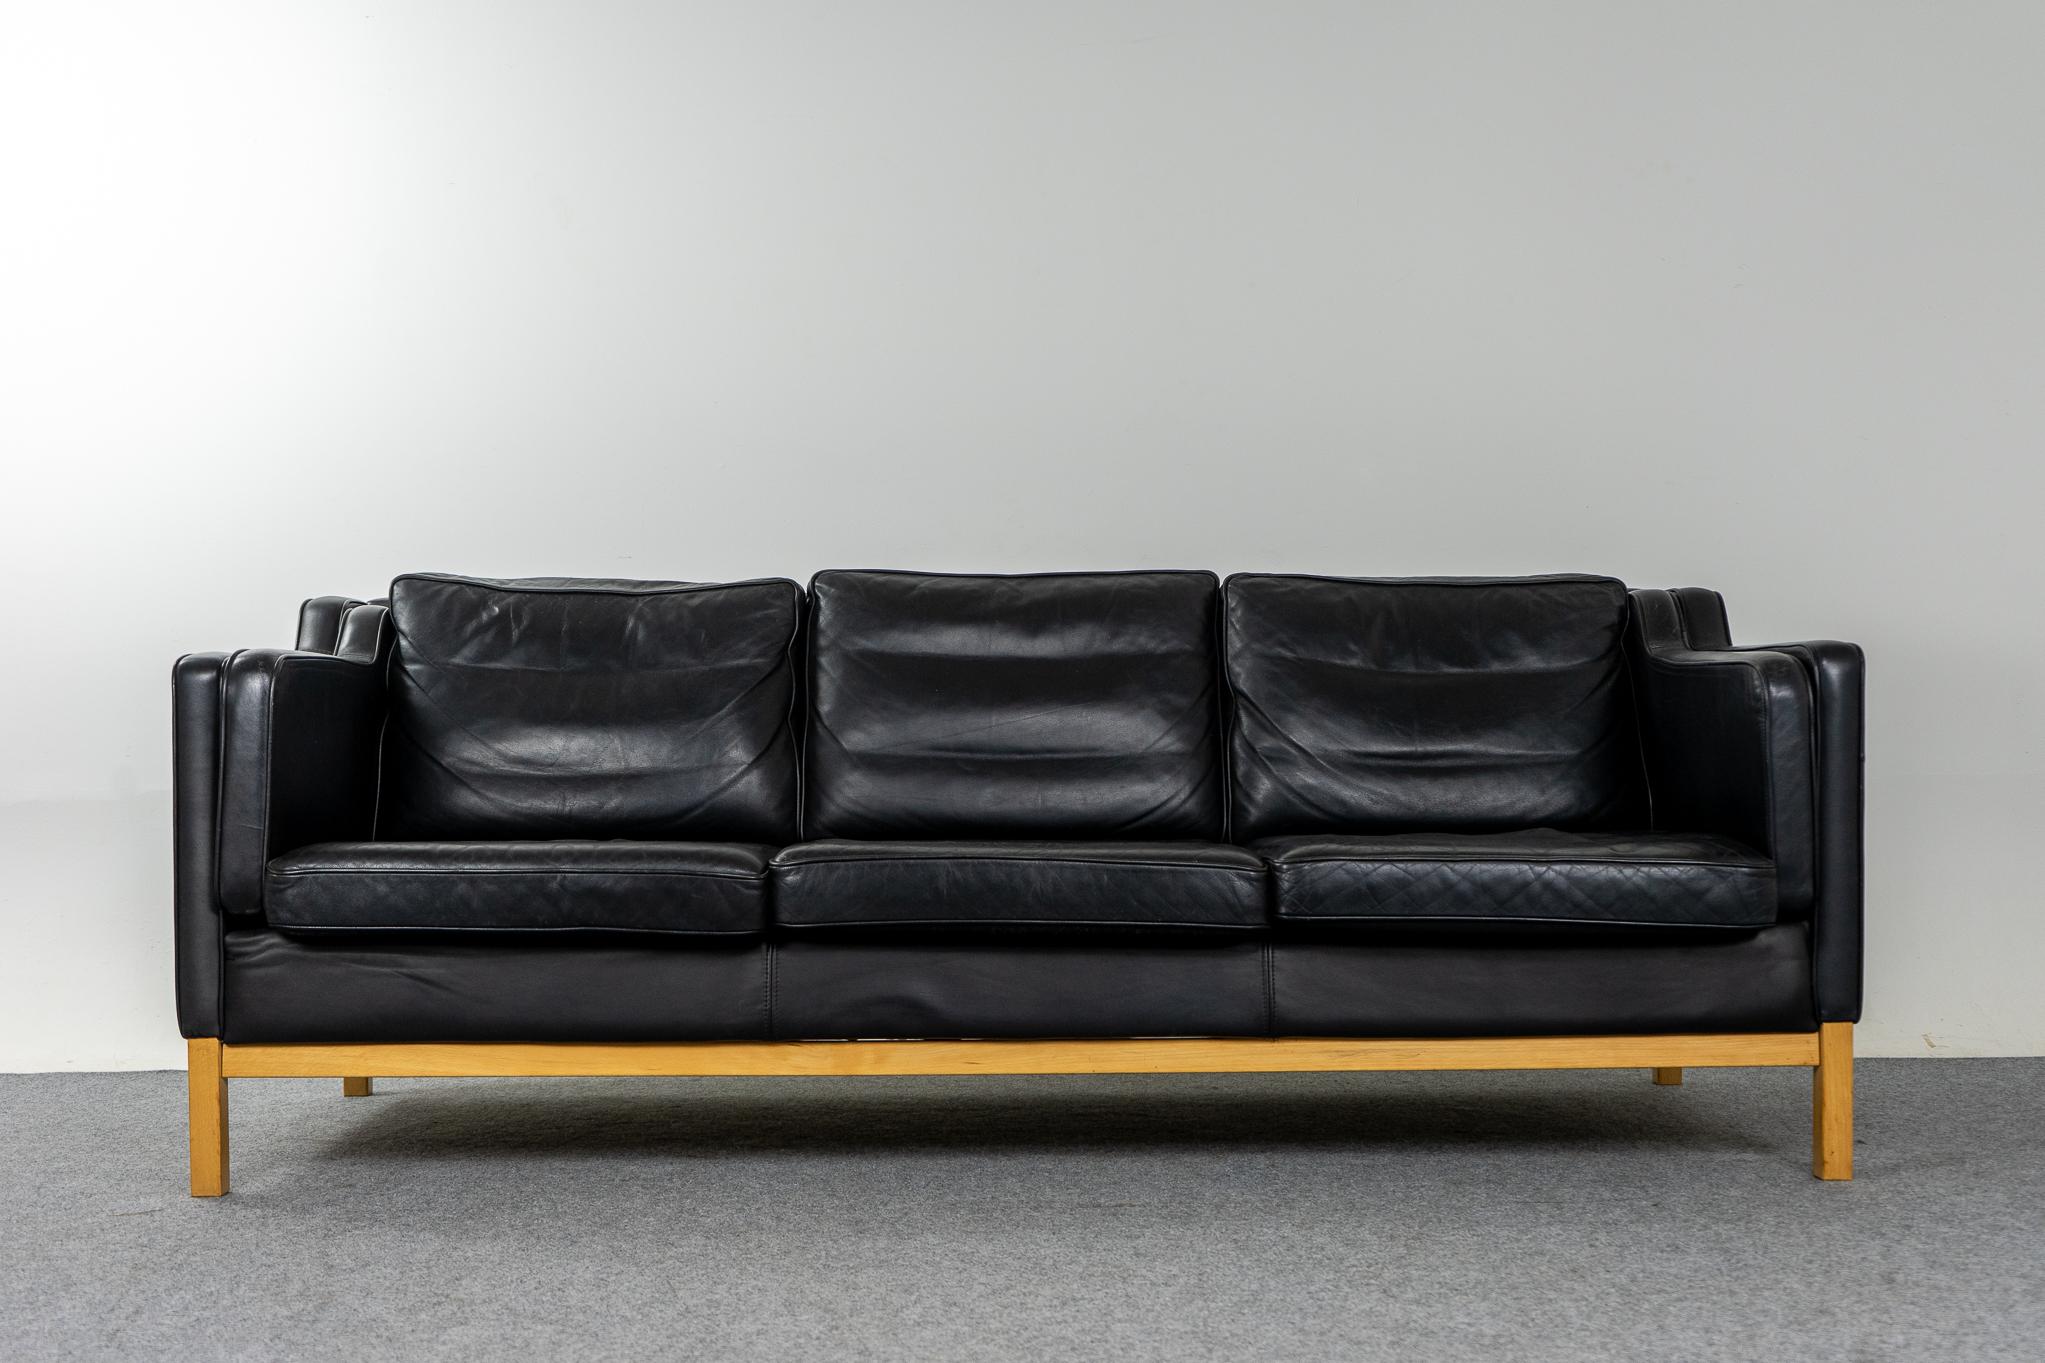 Danish Modern black leather three seat sofa, circa 1960's.Sofa rests on contrasting solid wood base. Original black leather is soft and supple while also being durable to ensure years of use and enjoyment. High quality construction and materials